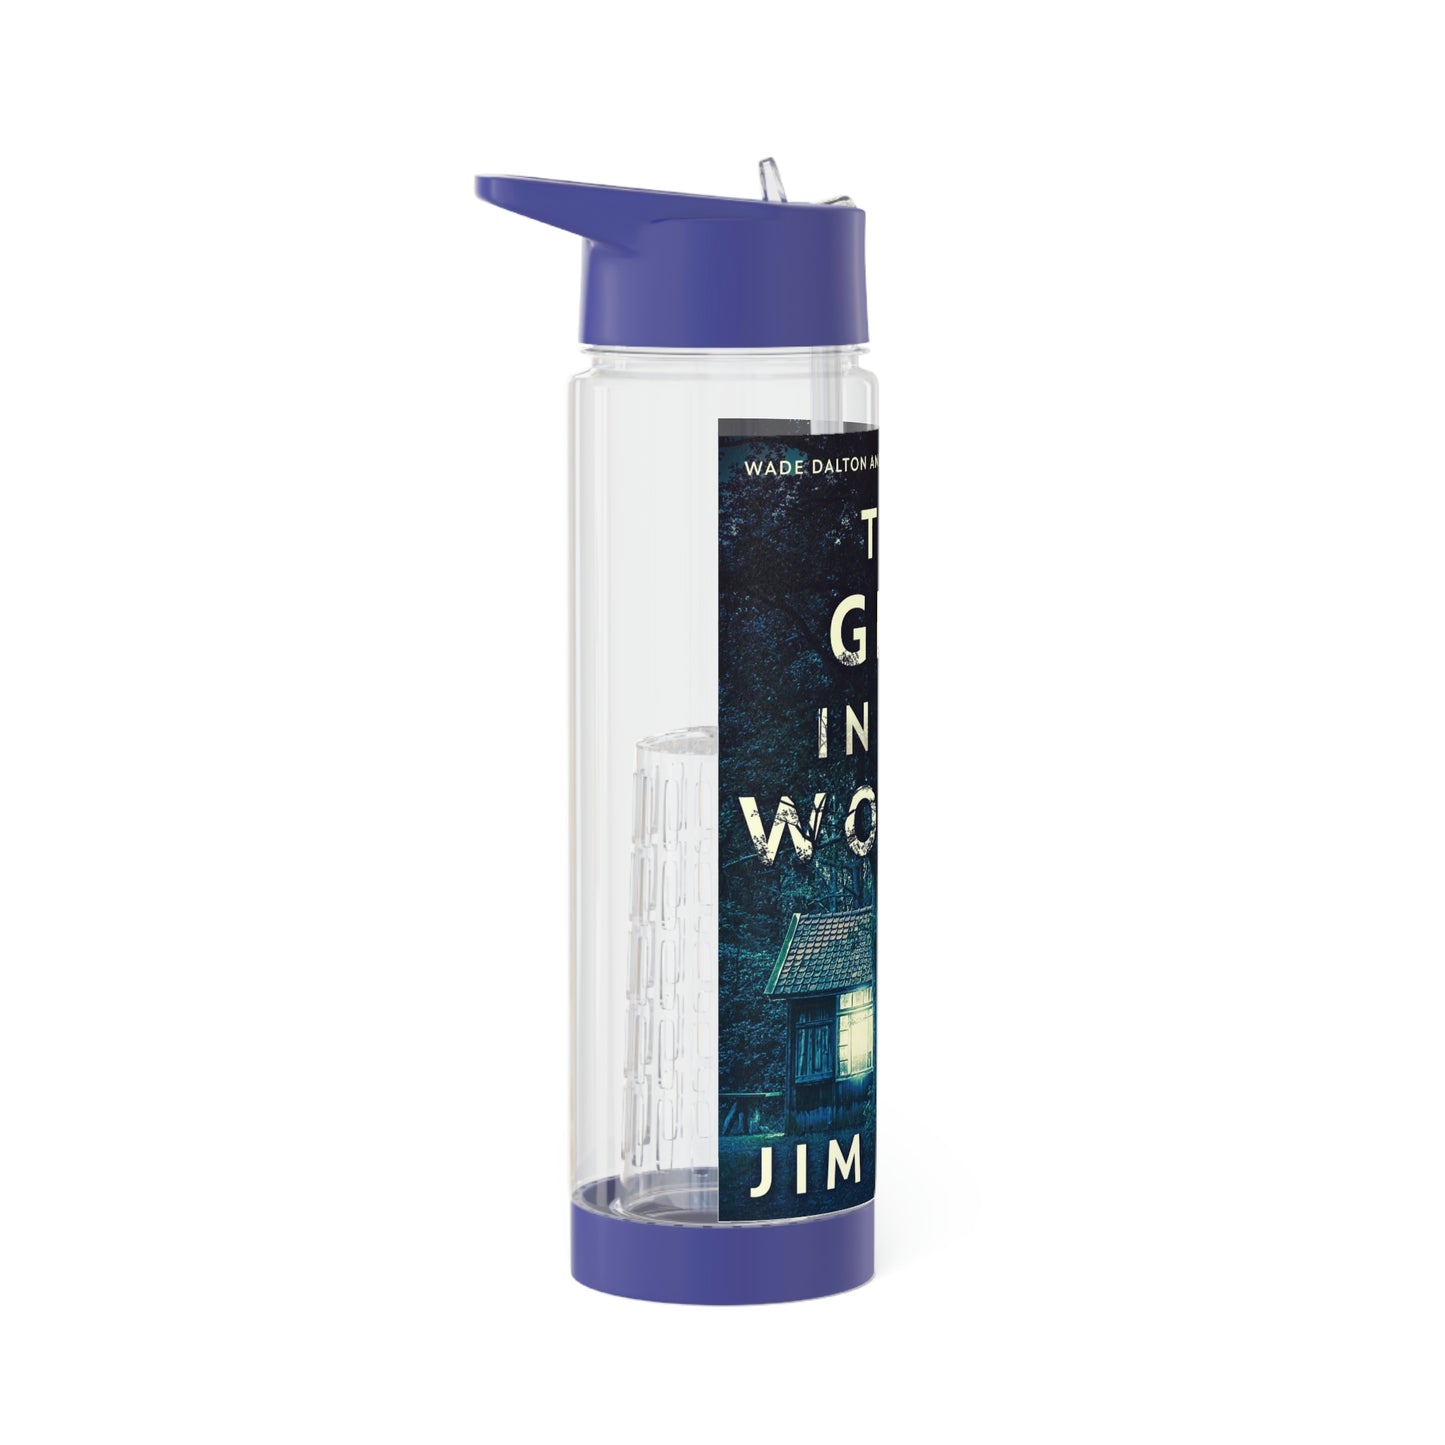 The Girl In The Woods - Infuser Water Bottle